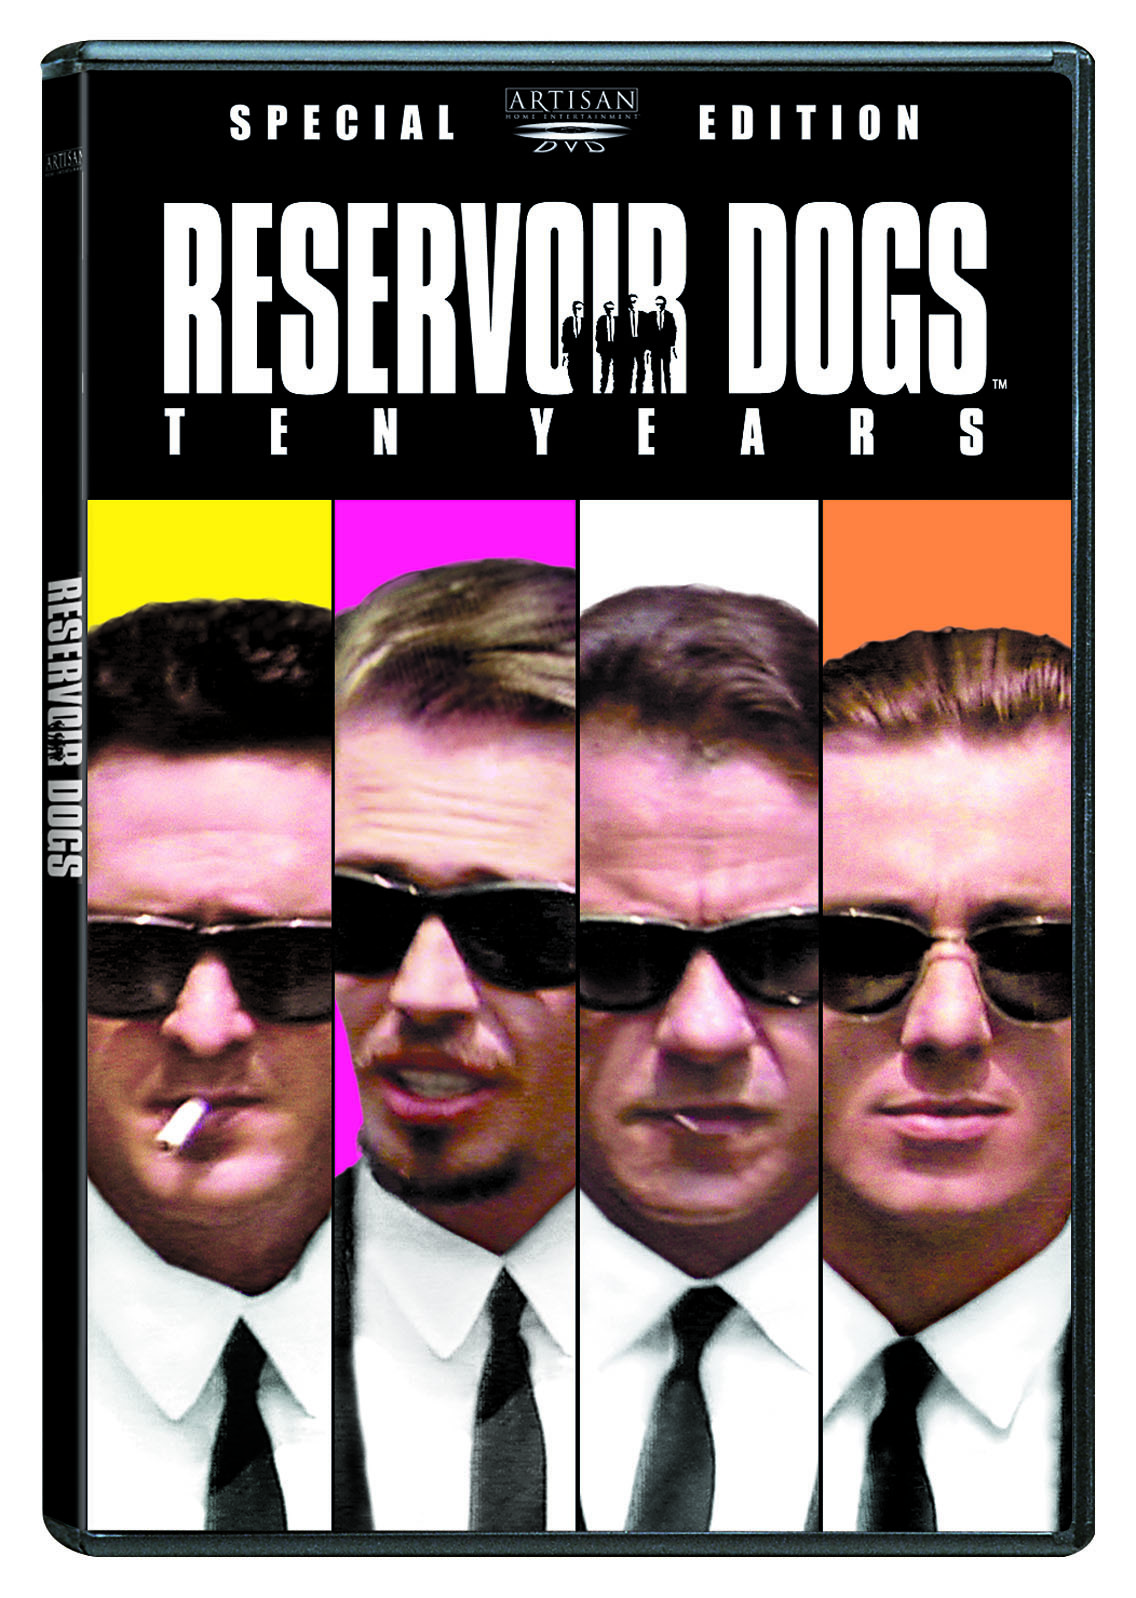 Reservoir Dogs (DVD Special Edition) - DVD [ 1992 ]  - Thriller Movies On DVD - Movies On GRUV